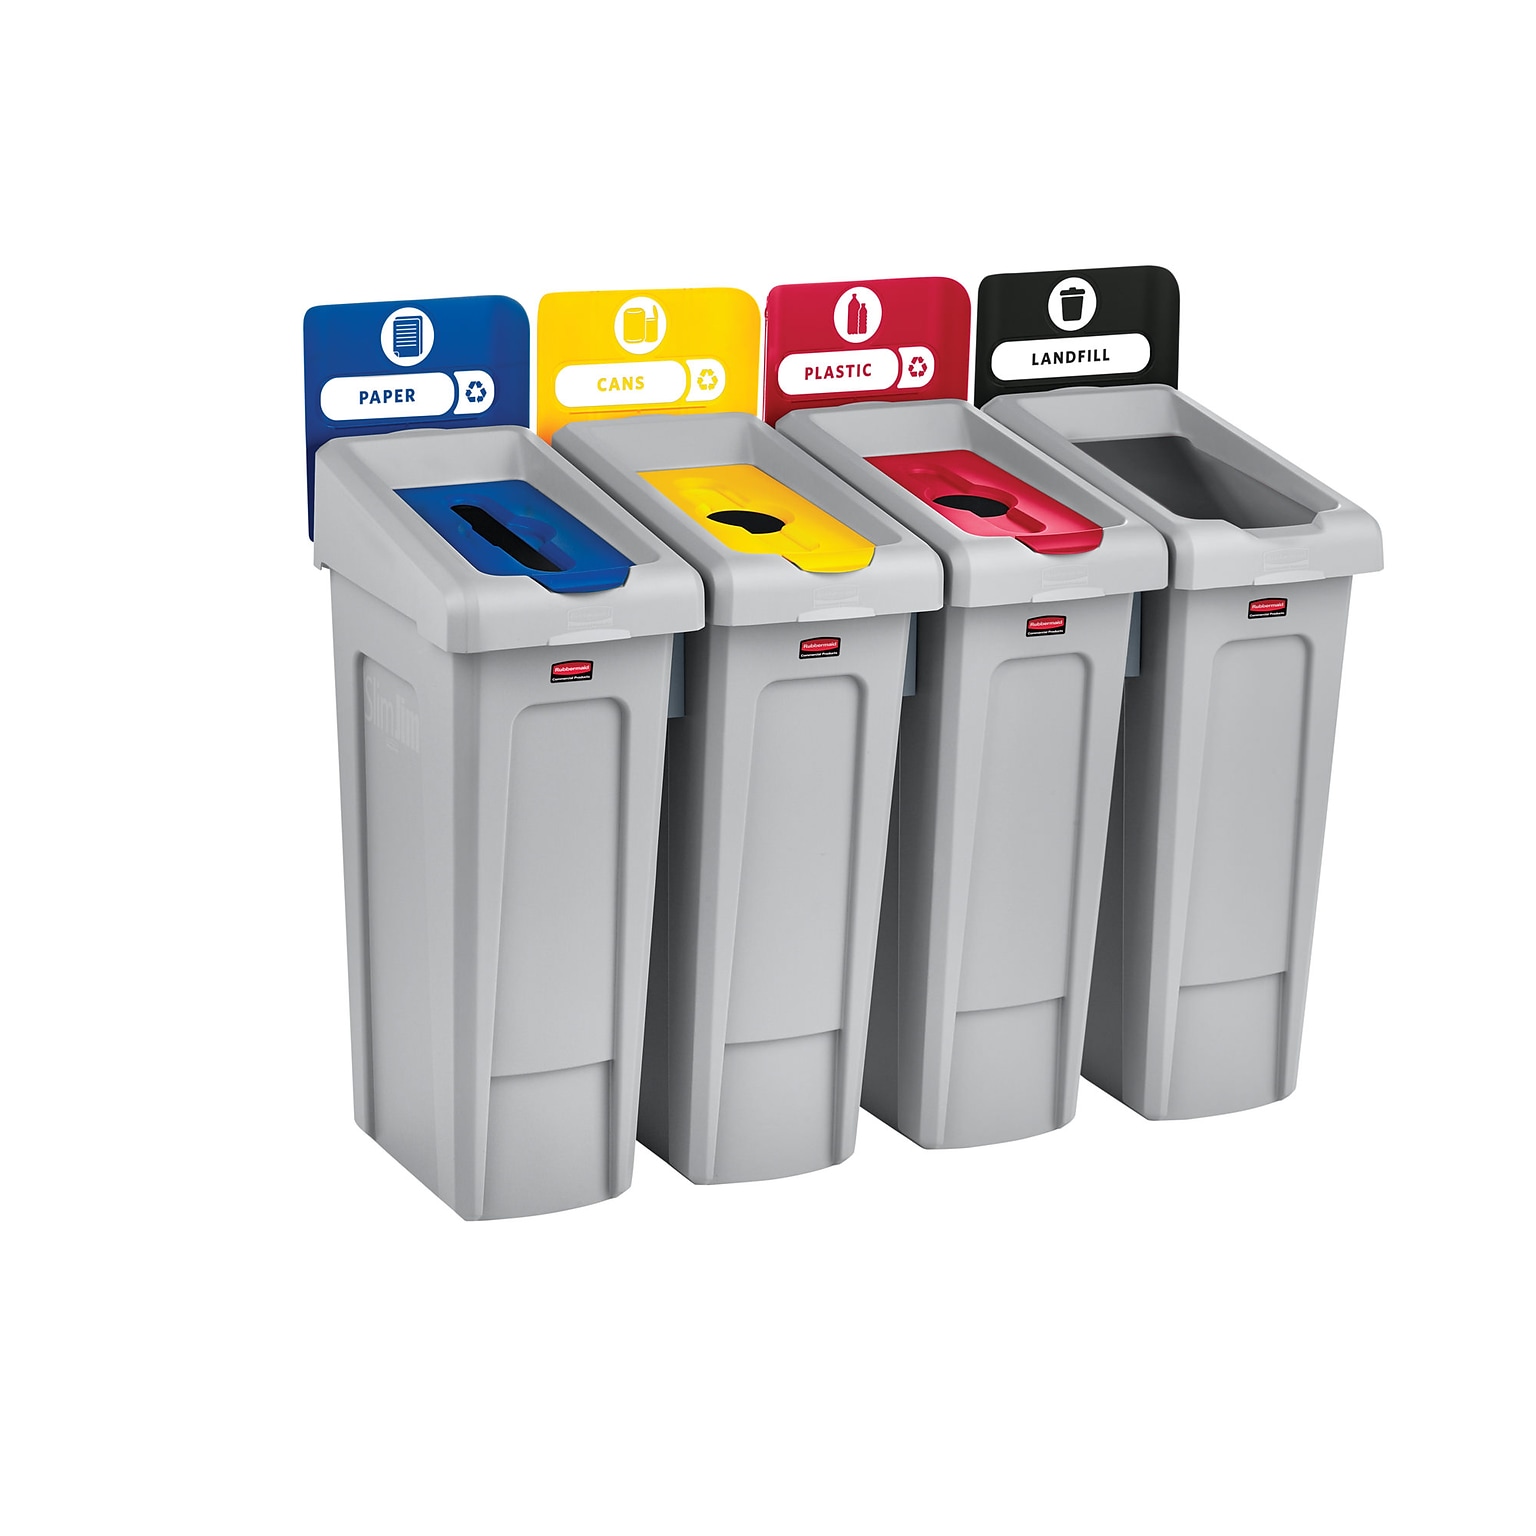 Rubbermaid Slim Jim Recycling Station Four Stream Landfill/Paper/Plastic/Cans, 23 Gal., Gray (2007919)